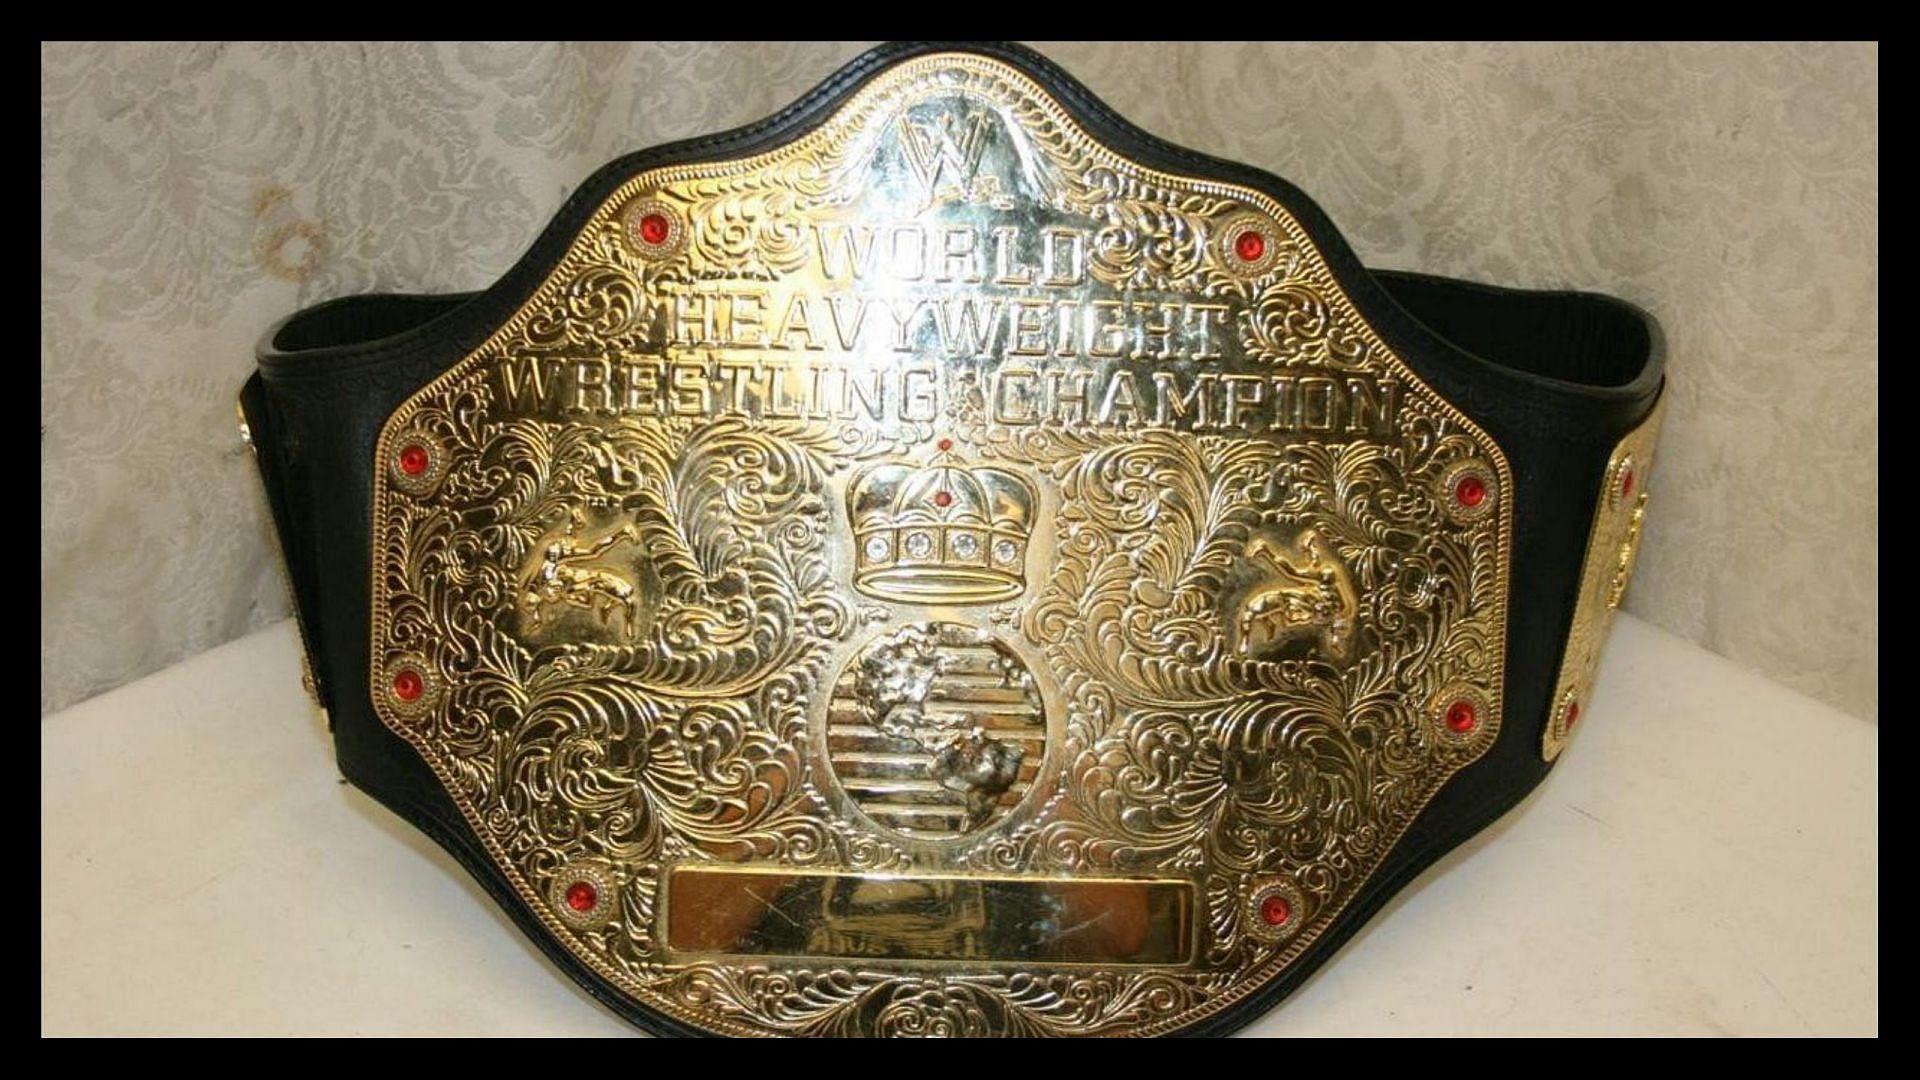 These current WWE superstars won the Big Gold Belt during its existence.